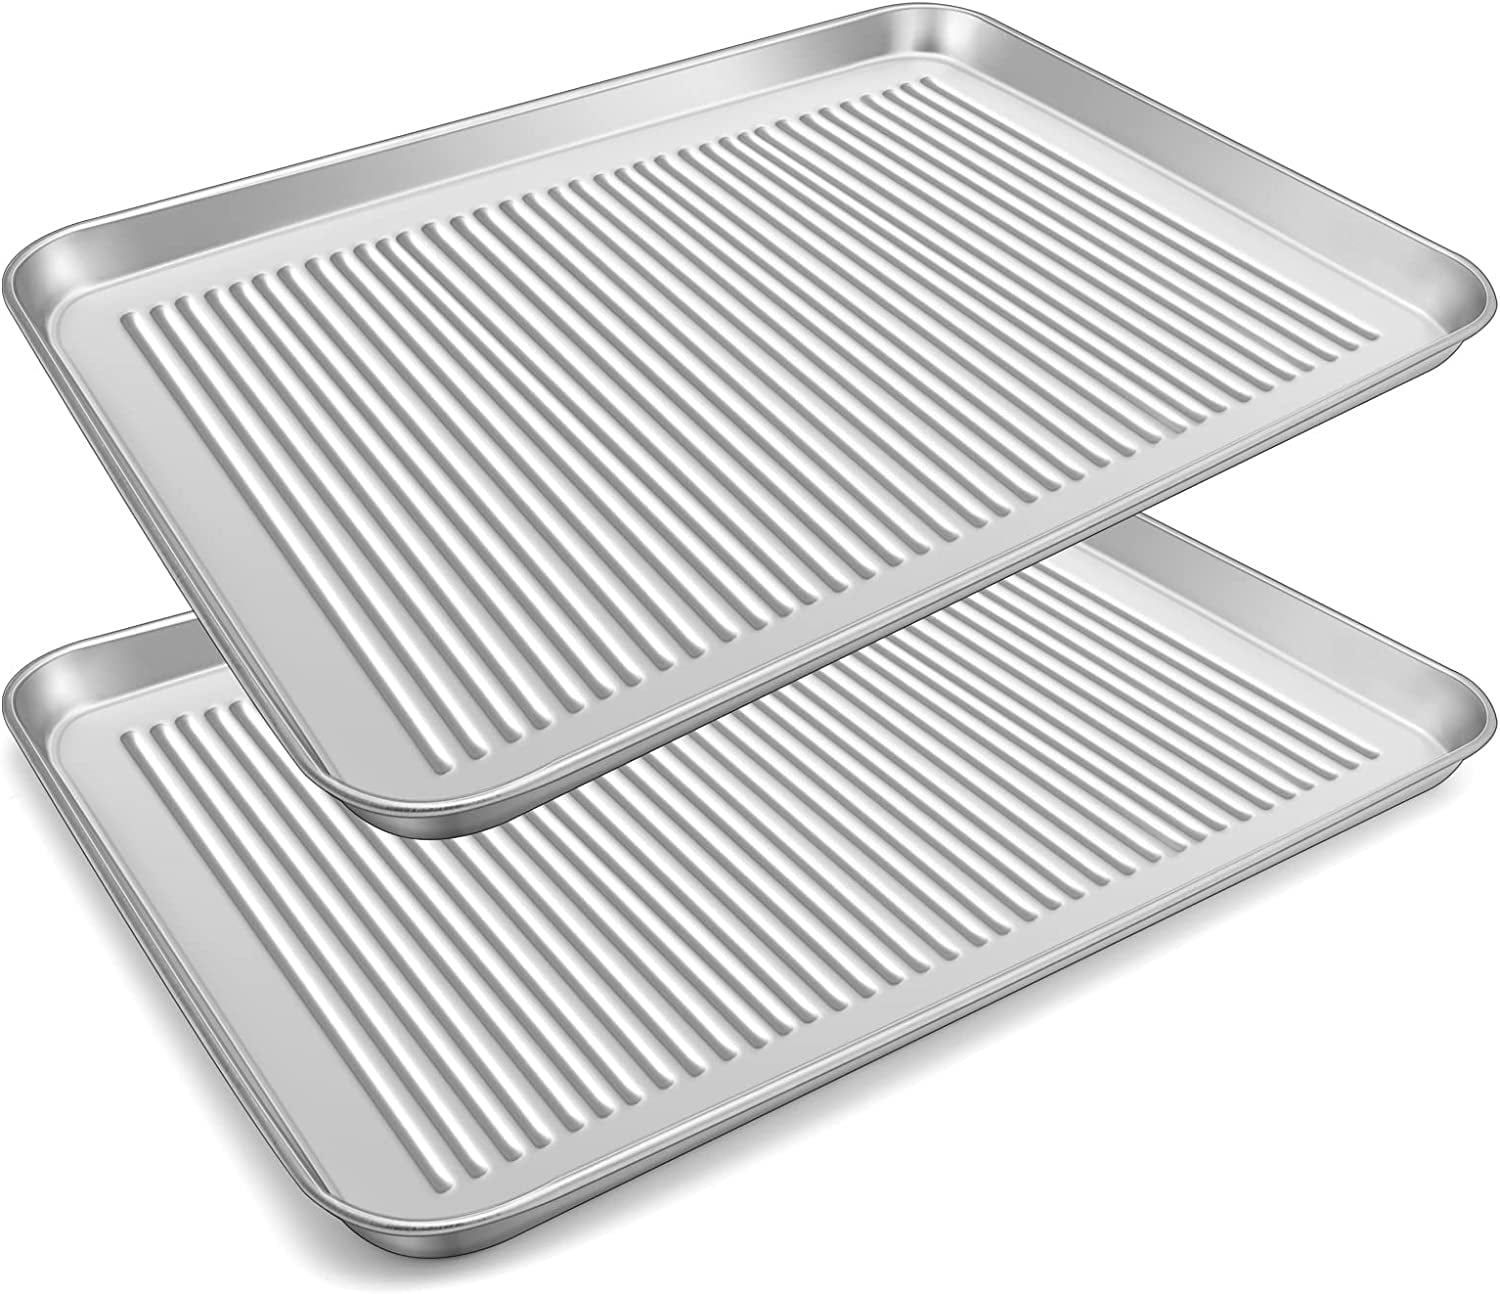 Baking Sheet Pan Set of 2, Vesteel Stainless Steel 16 x 12 inch Half Cookie  Baking Pans, Rectangle Oven Trays for Cooking, Textured Surface